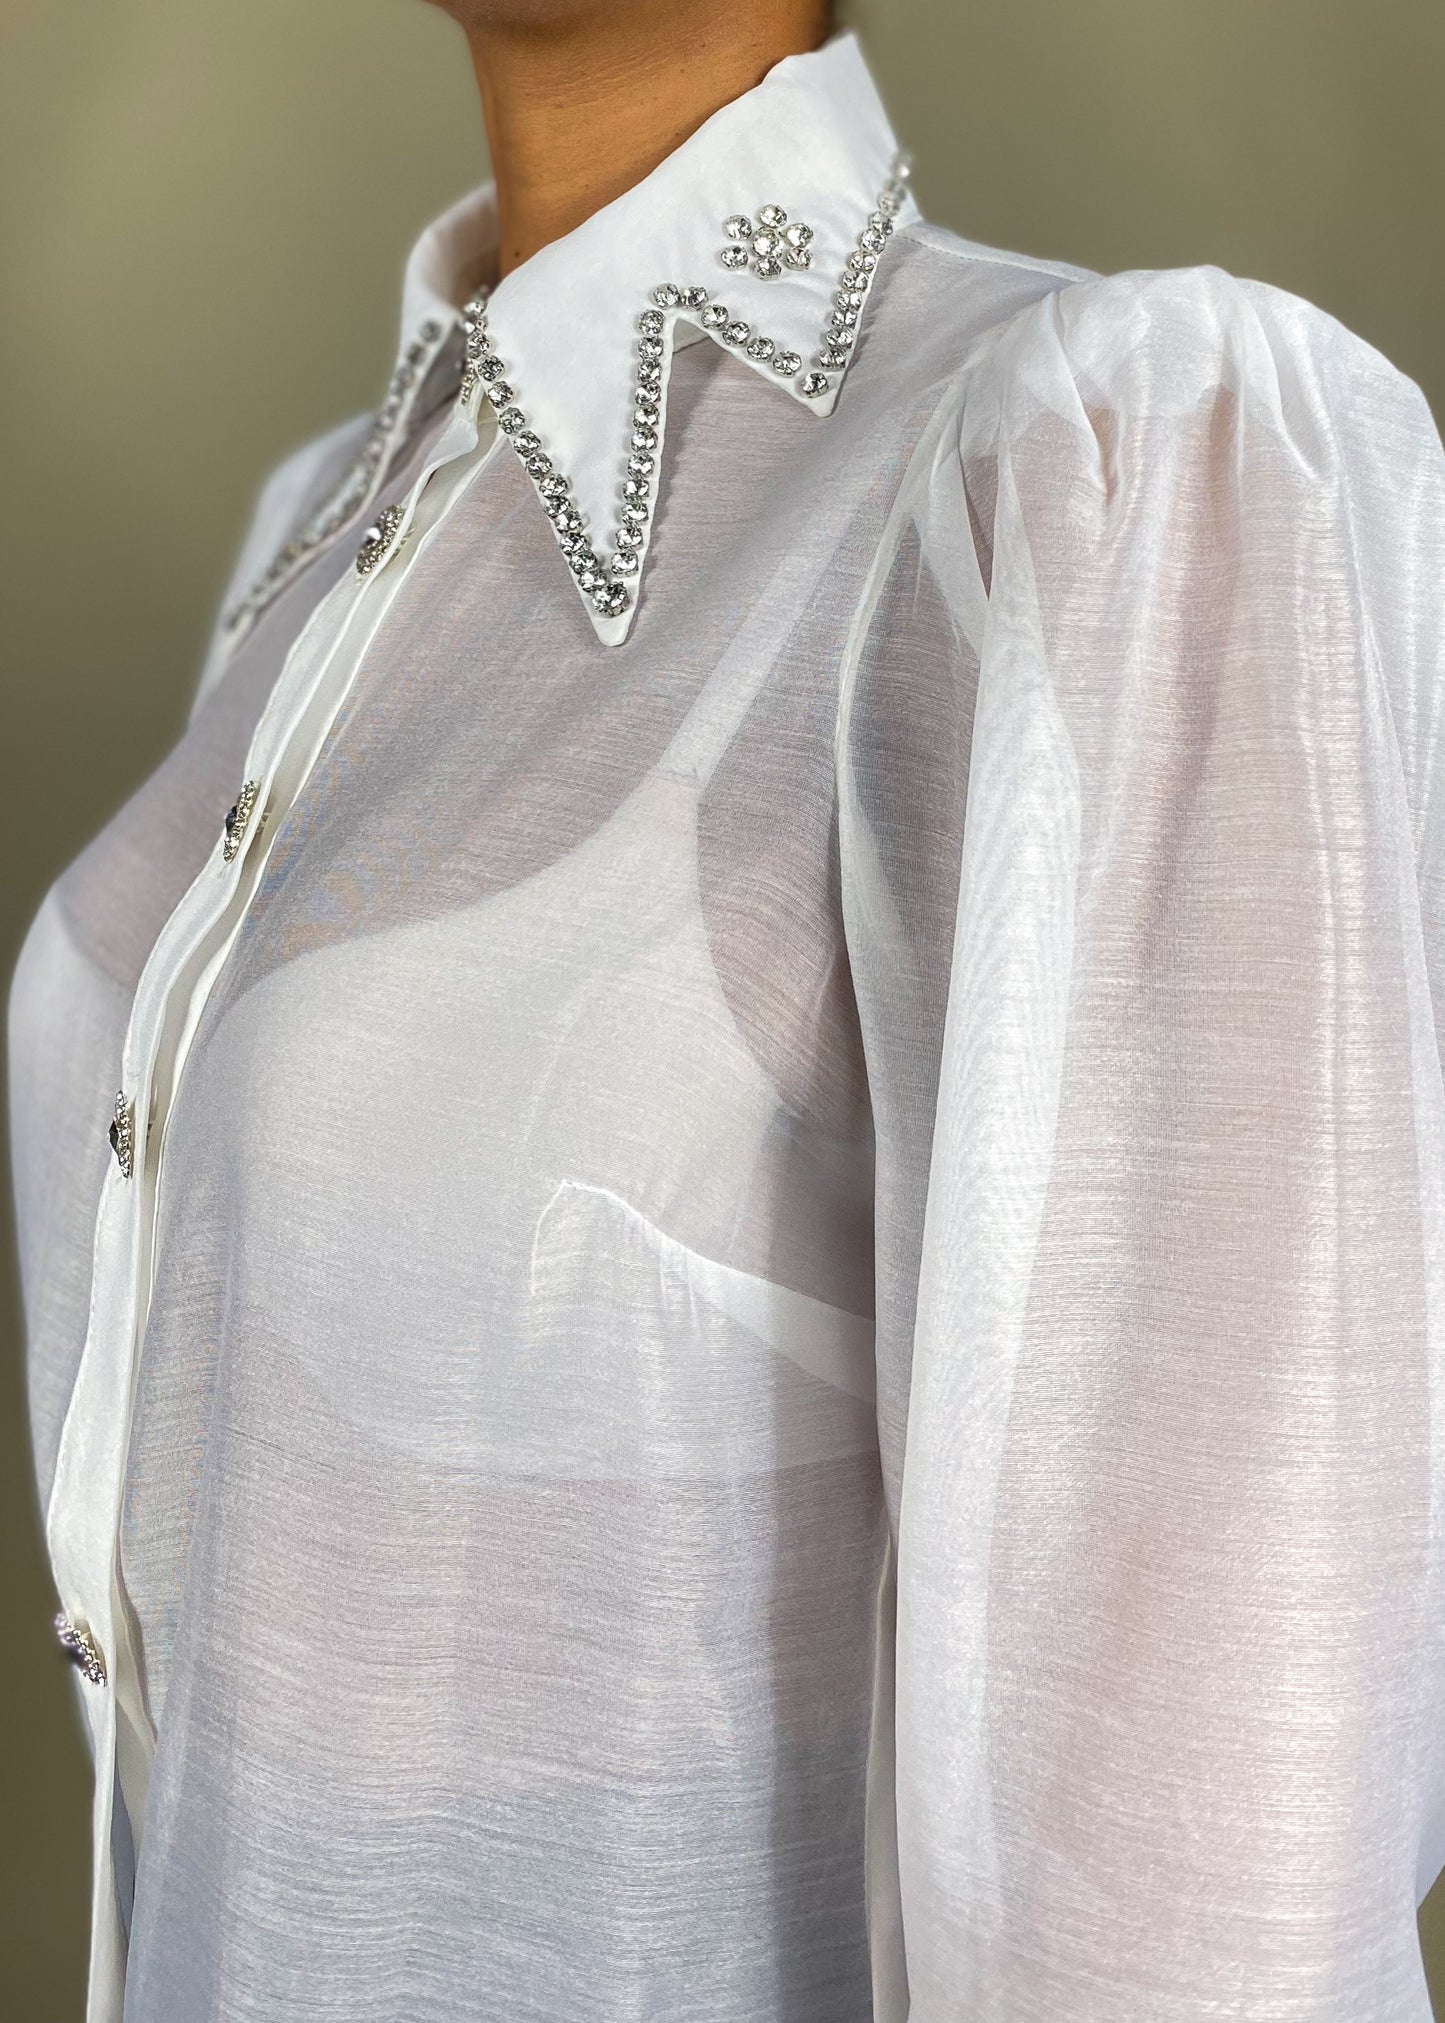 Icy White Sheer Blouse